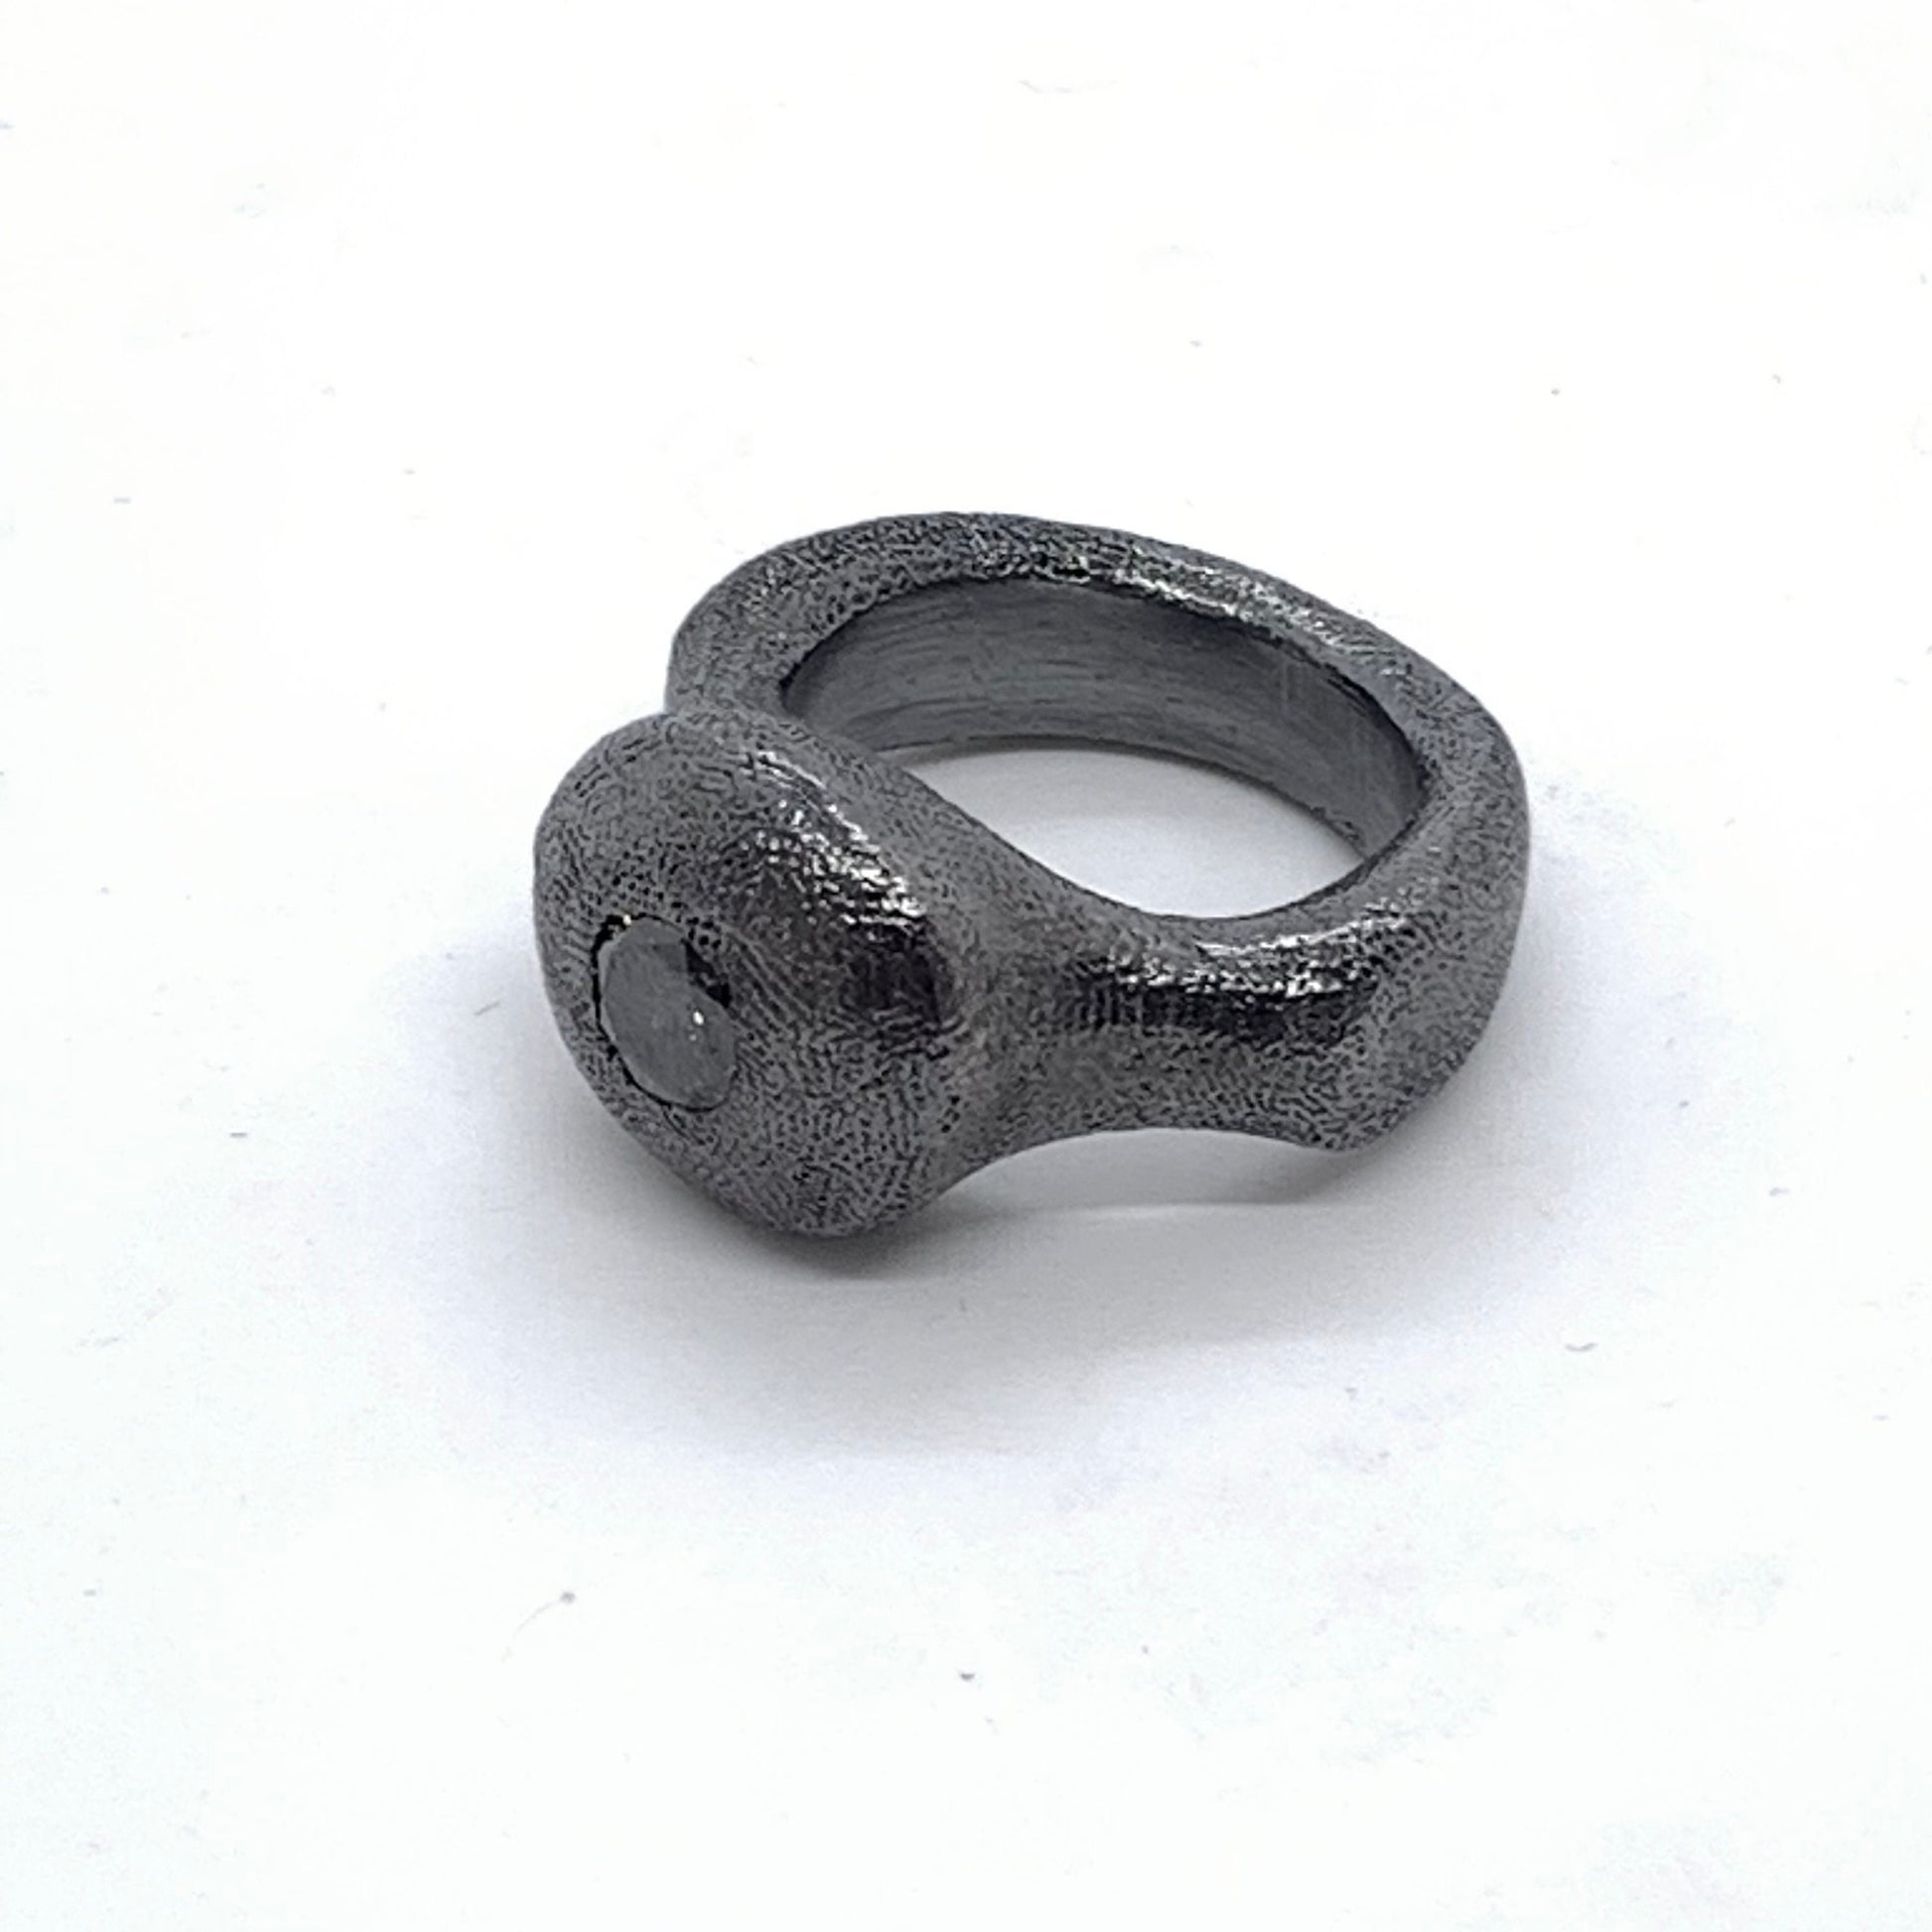 3 Cast Iron Ring with a Clamp